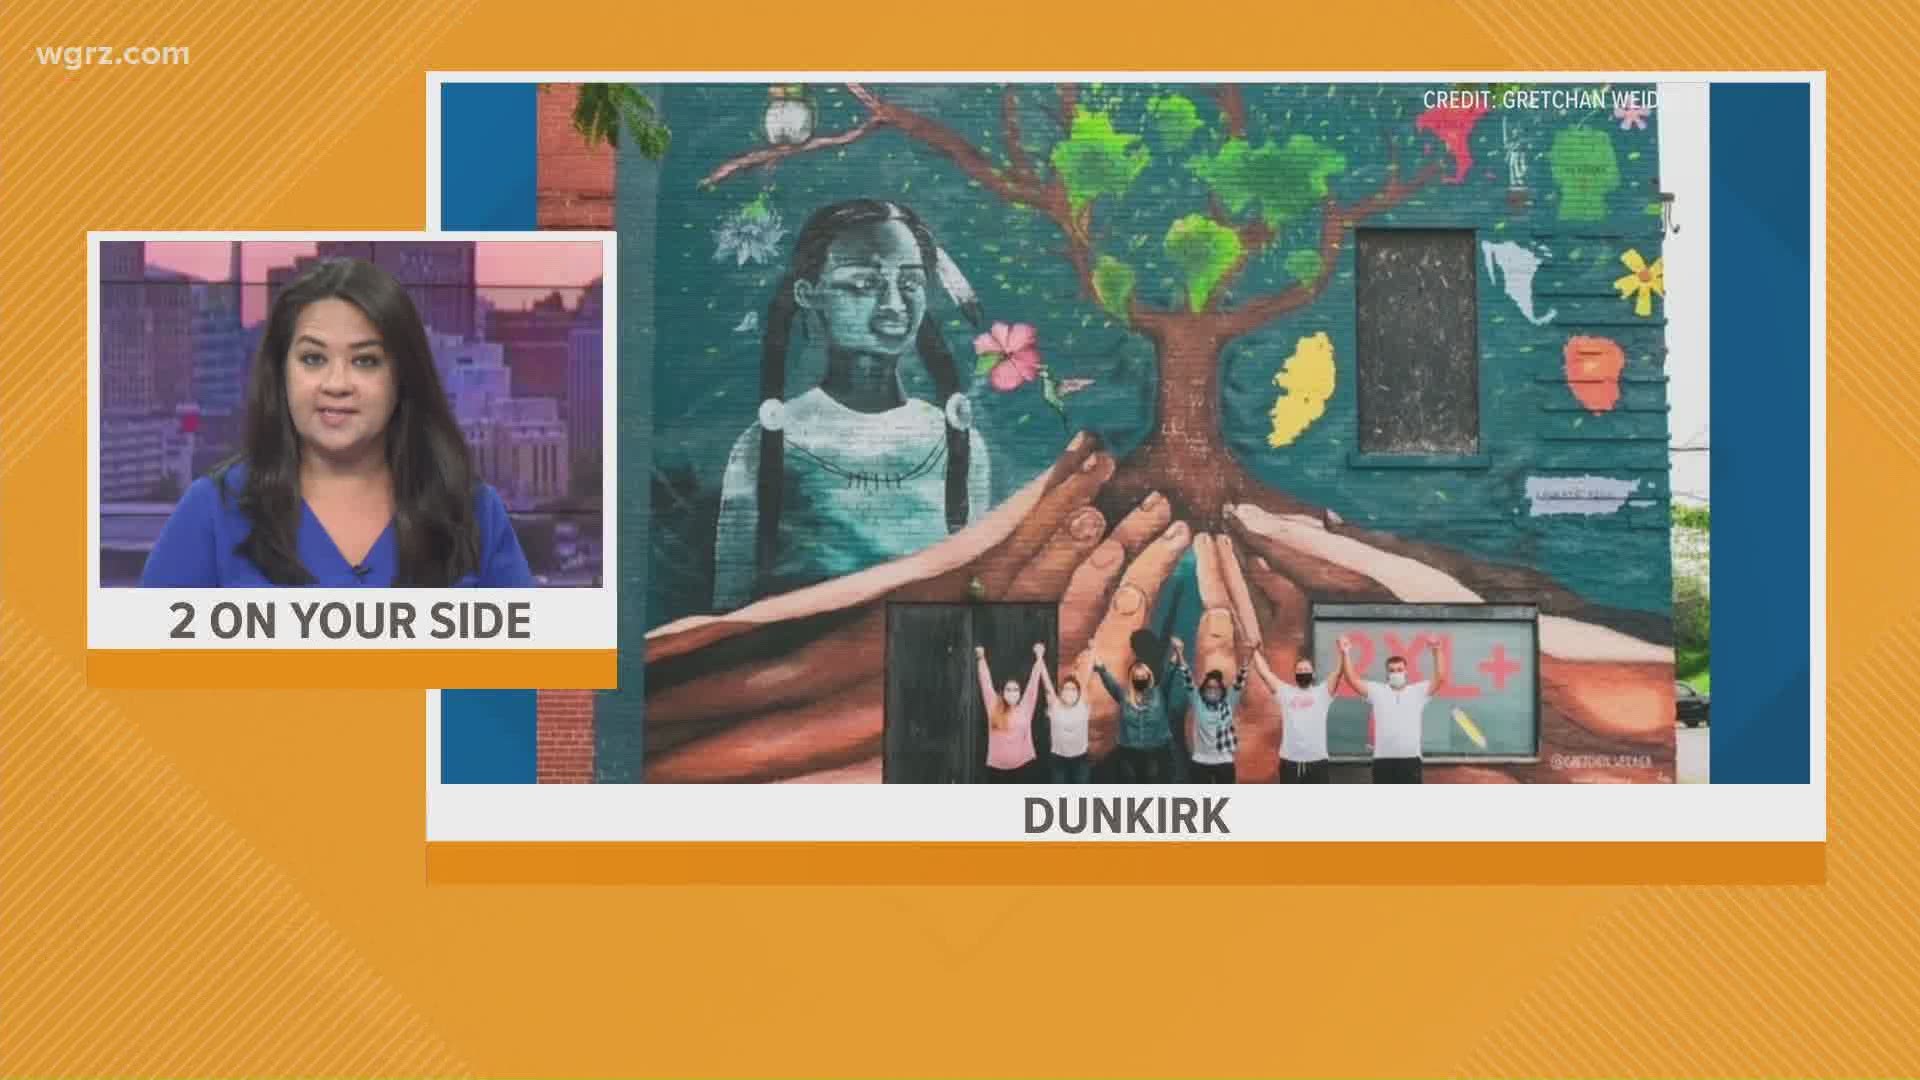 The new mural was painted by a former Dunkirk Schools art teacher.